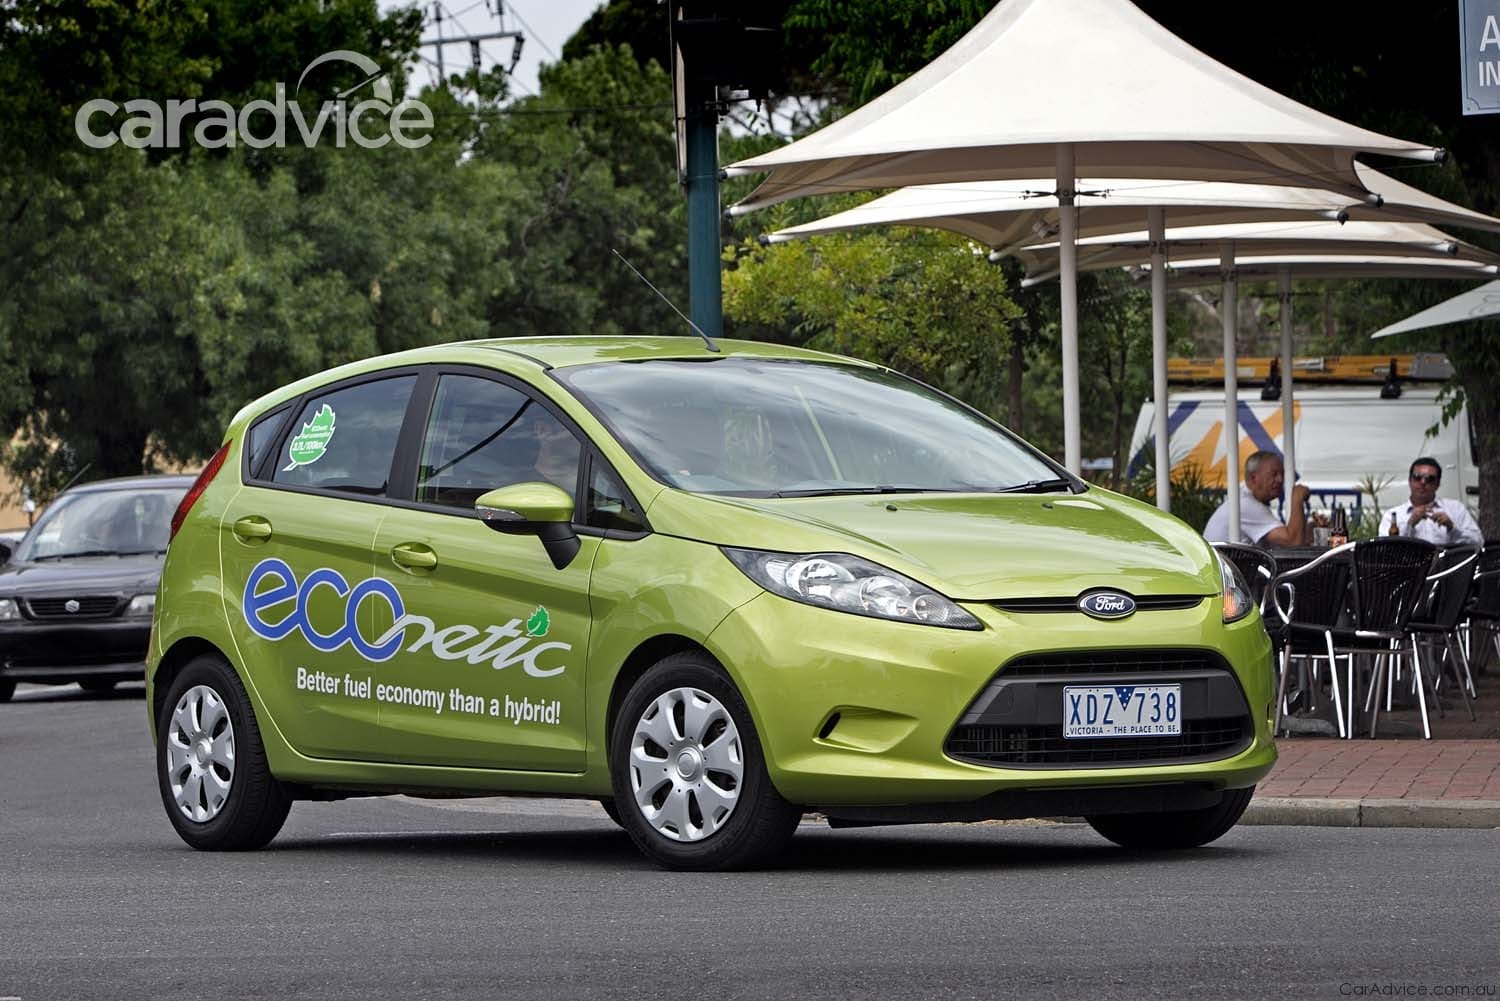 Ford Fiesta Econetic Review Caradvice